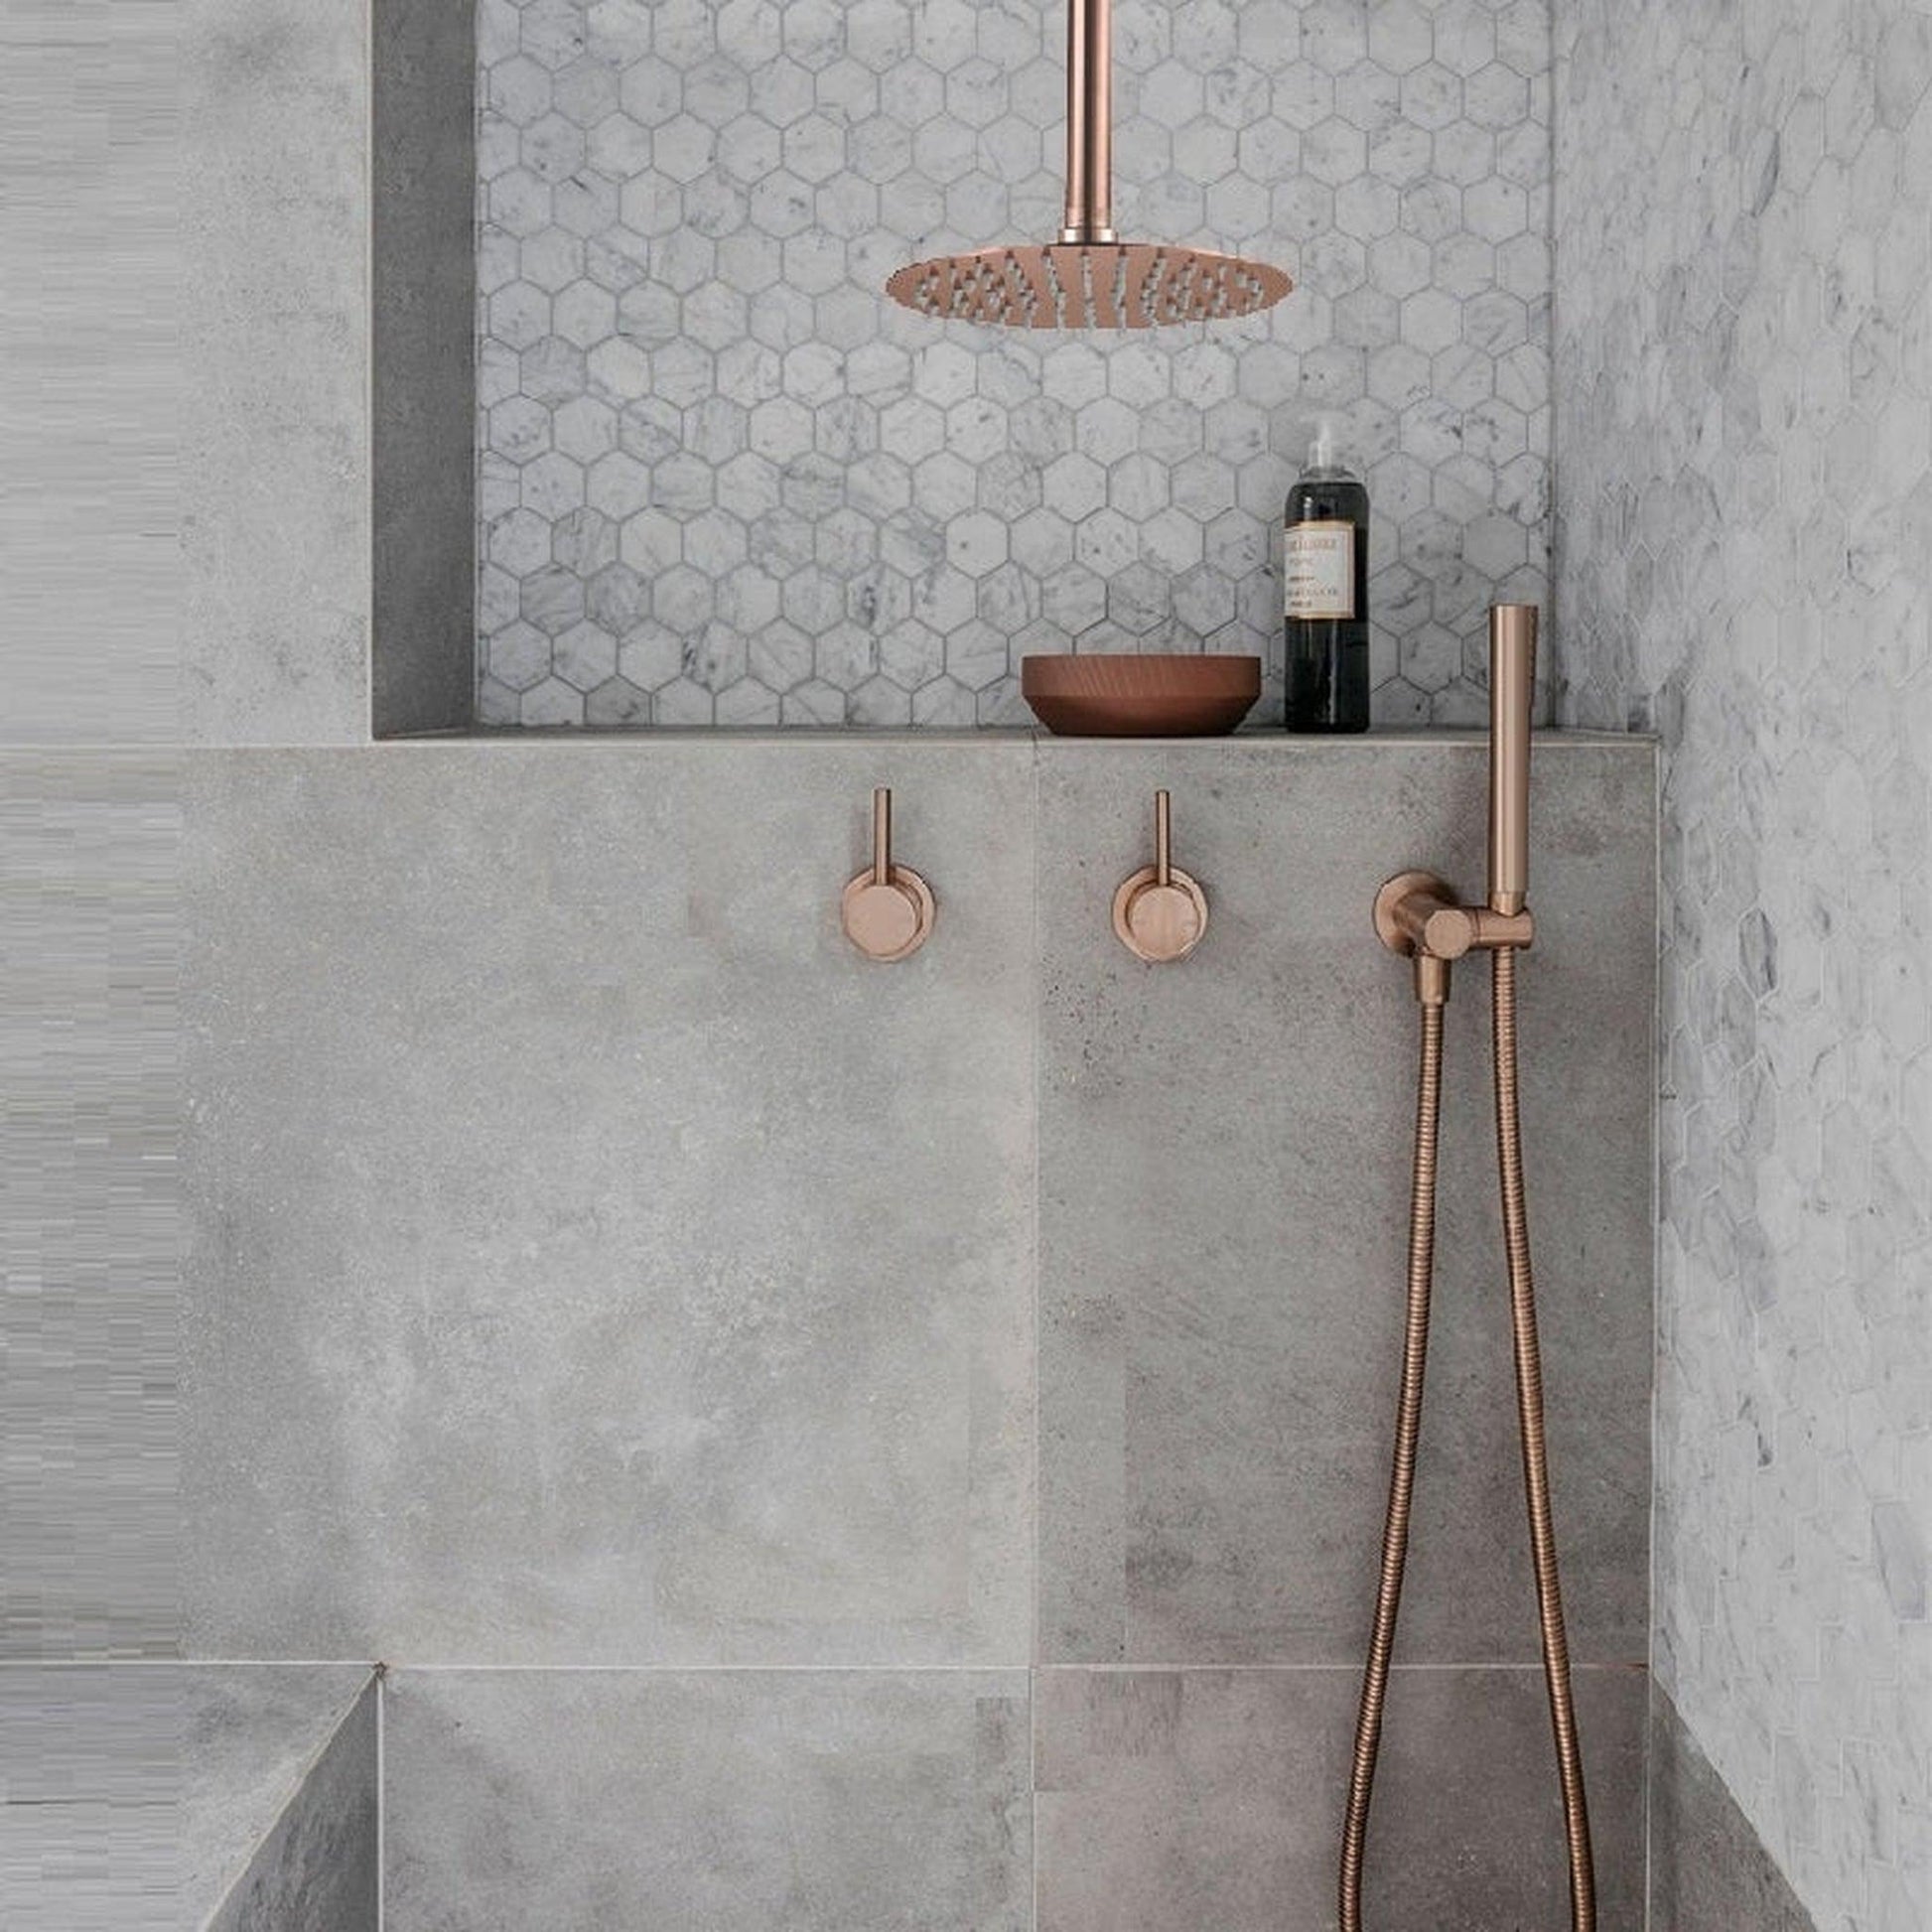 https://usbathstore.com/cdn/shop/files/FontanaShowers-Verona-Creative-Luxury-Rose-Gold-Round-Ceiling-Mounted-Solid-Brass-Shower-Head-Rainfall-Shower-System-With-Dual-Mixer-and-Hand-Shower-3.jpg?v=1683630811&width=1946